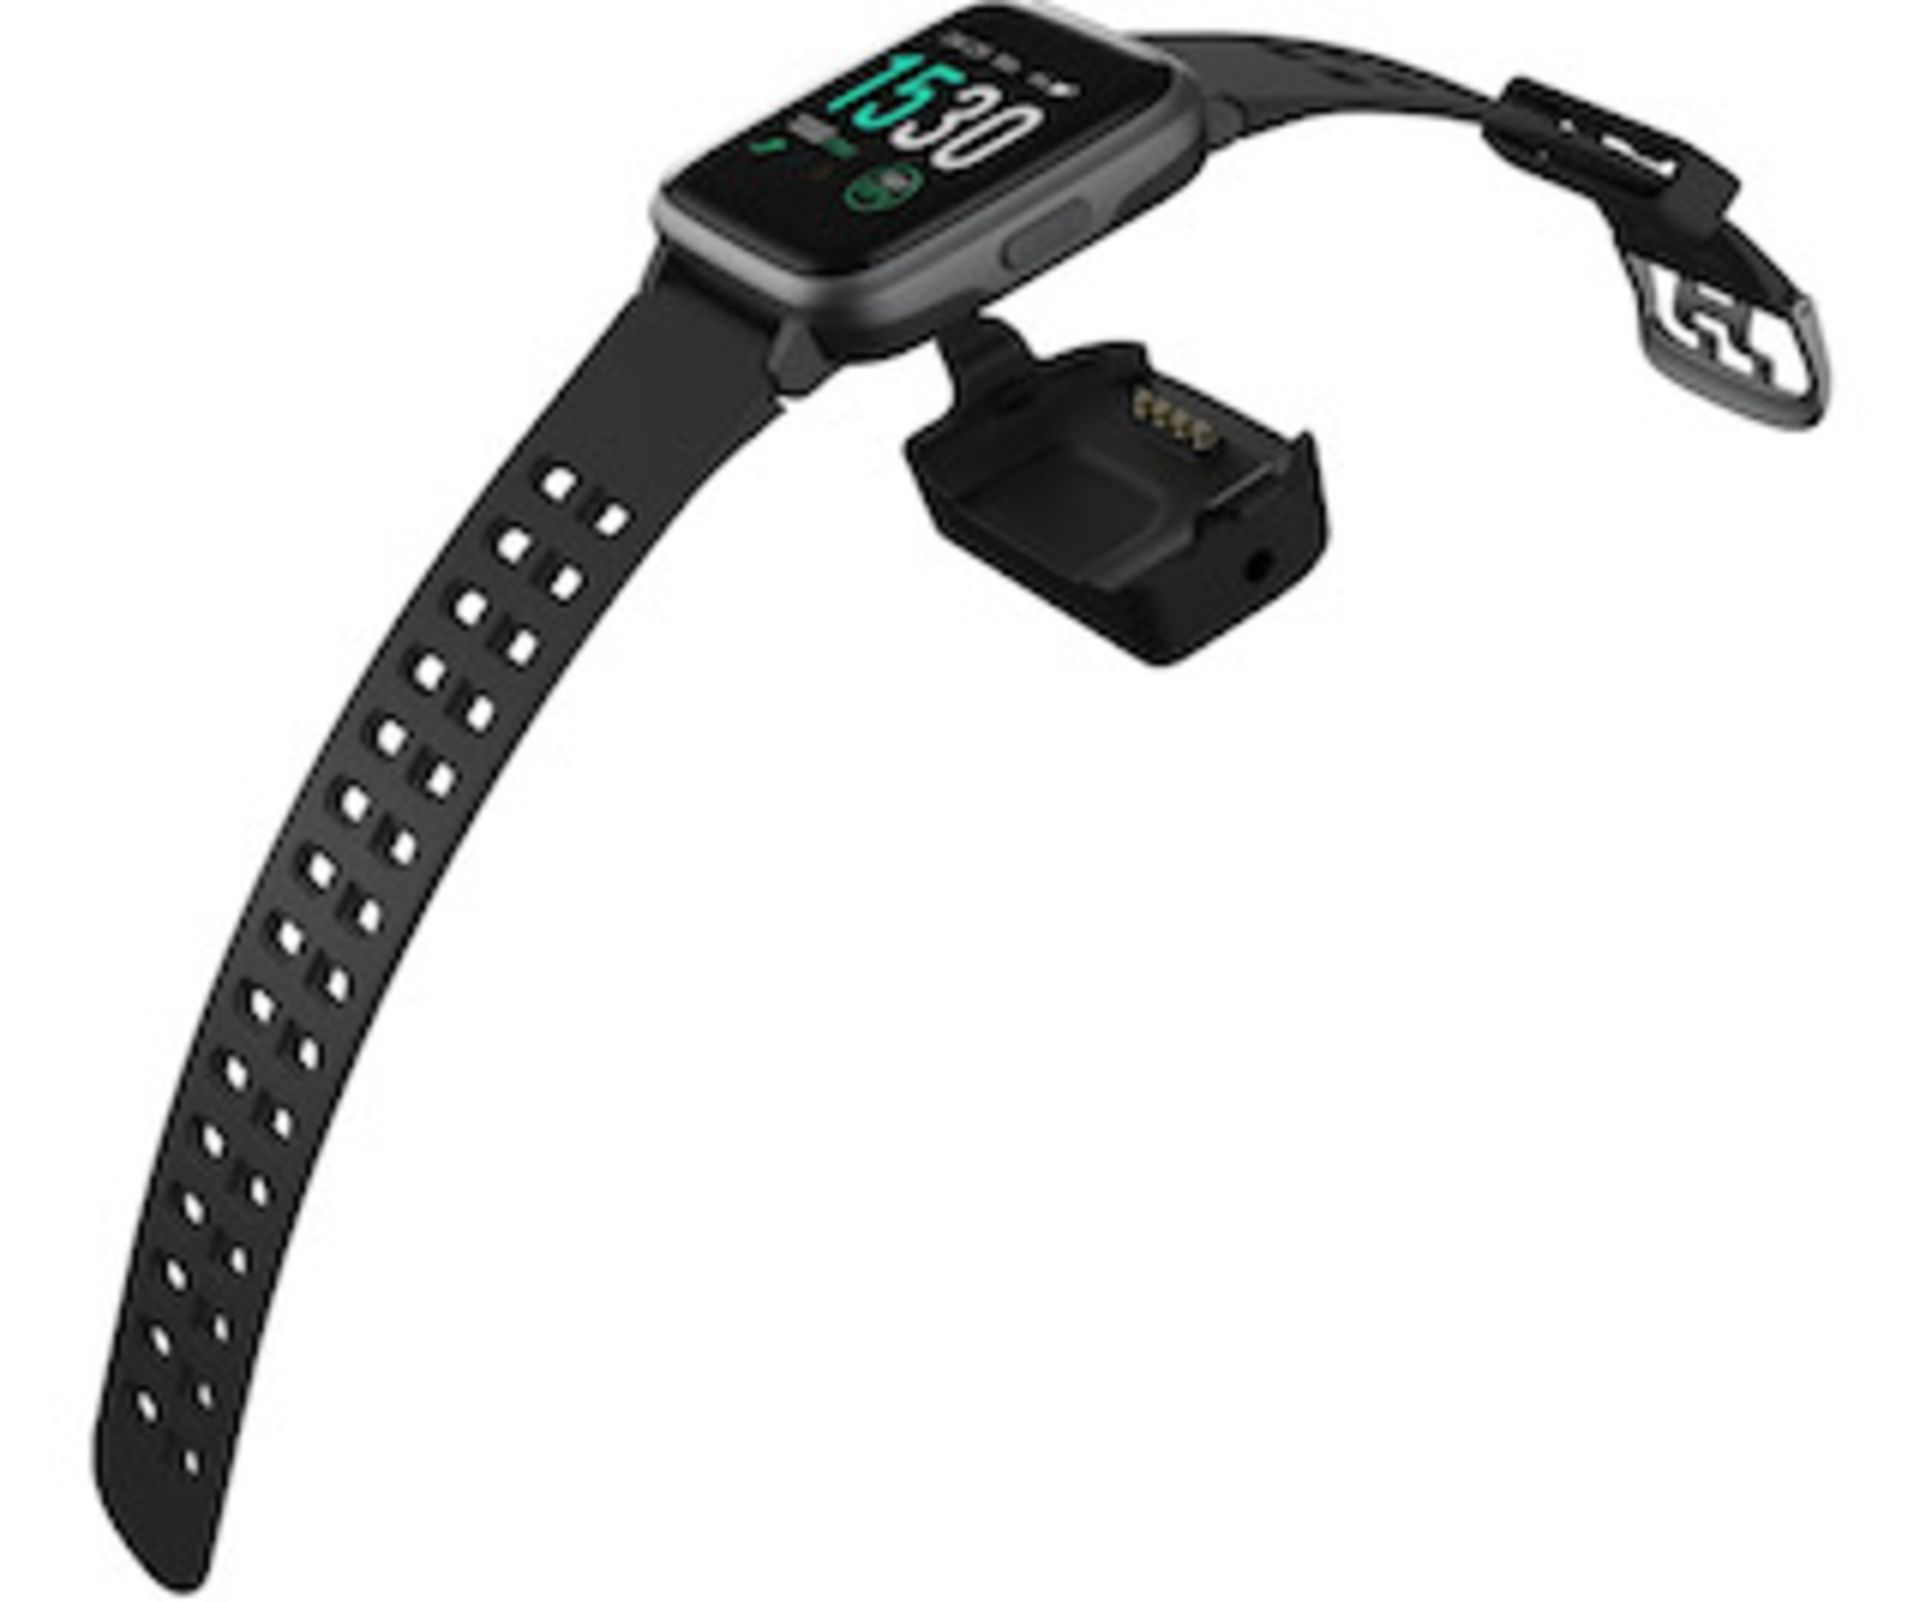 Brand New Unisex Fitness Tracker Watch Id205 Black Strap About This Item 1.3-Inch LCD Colour - Image 20 of 30